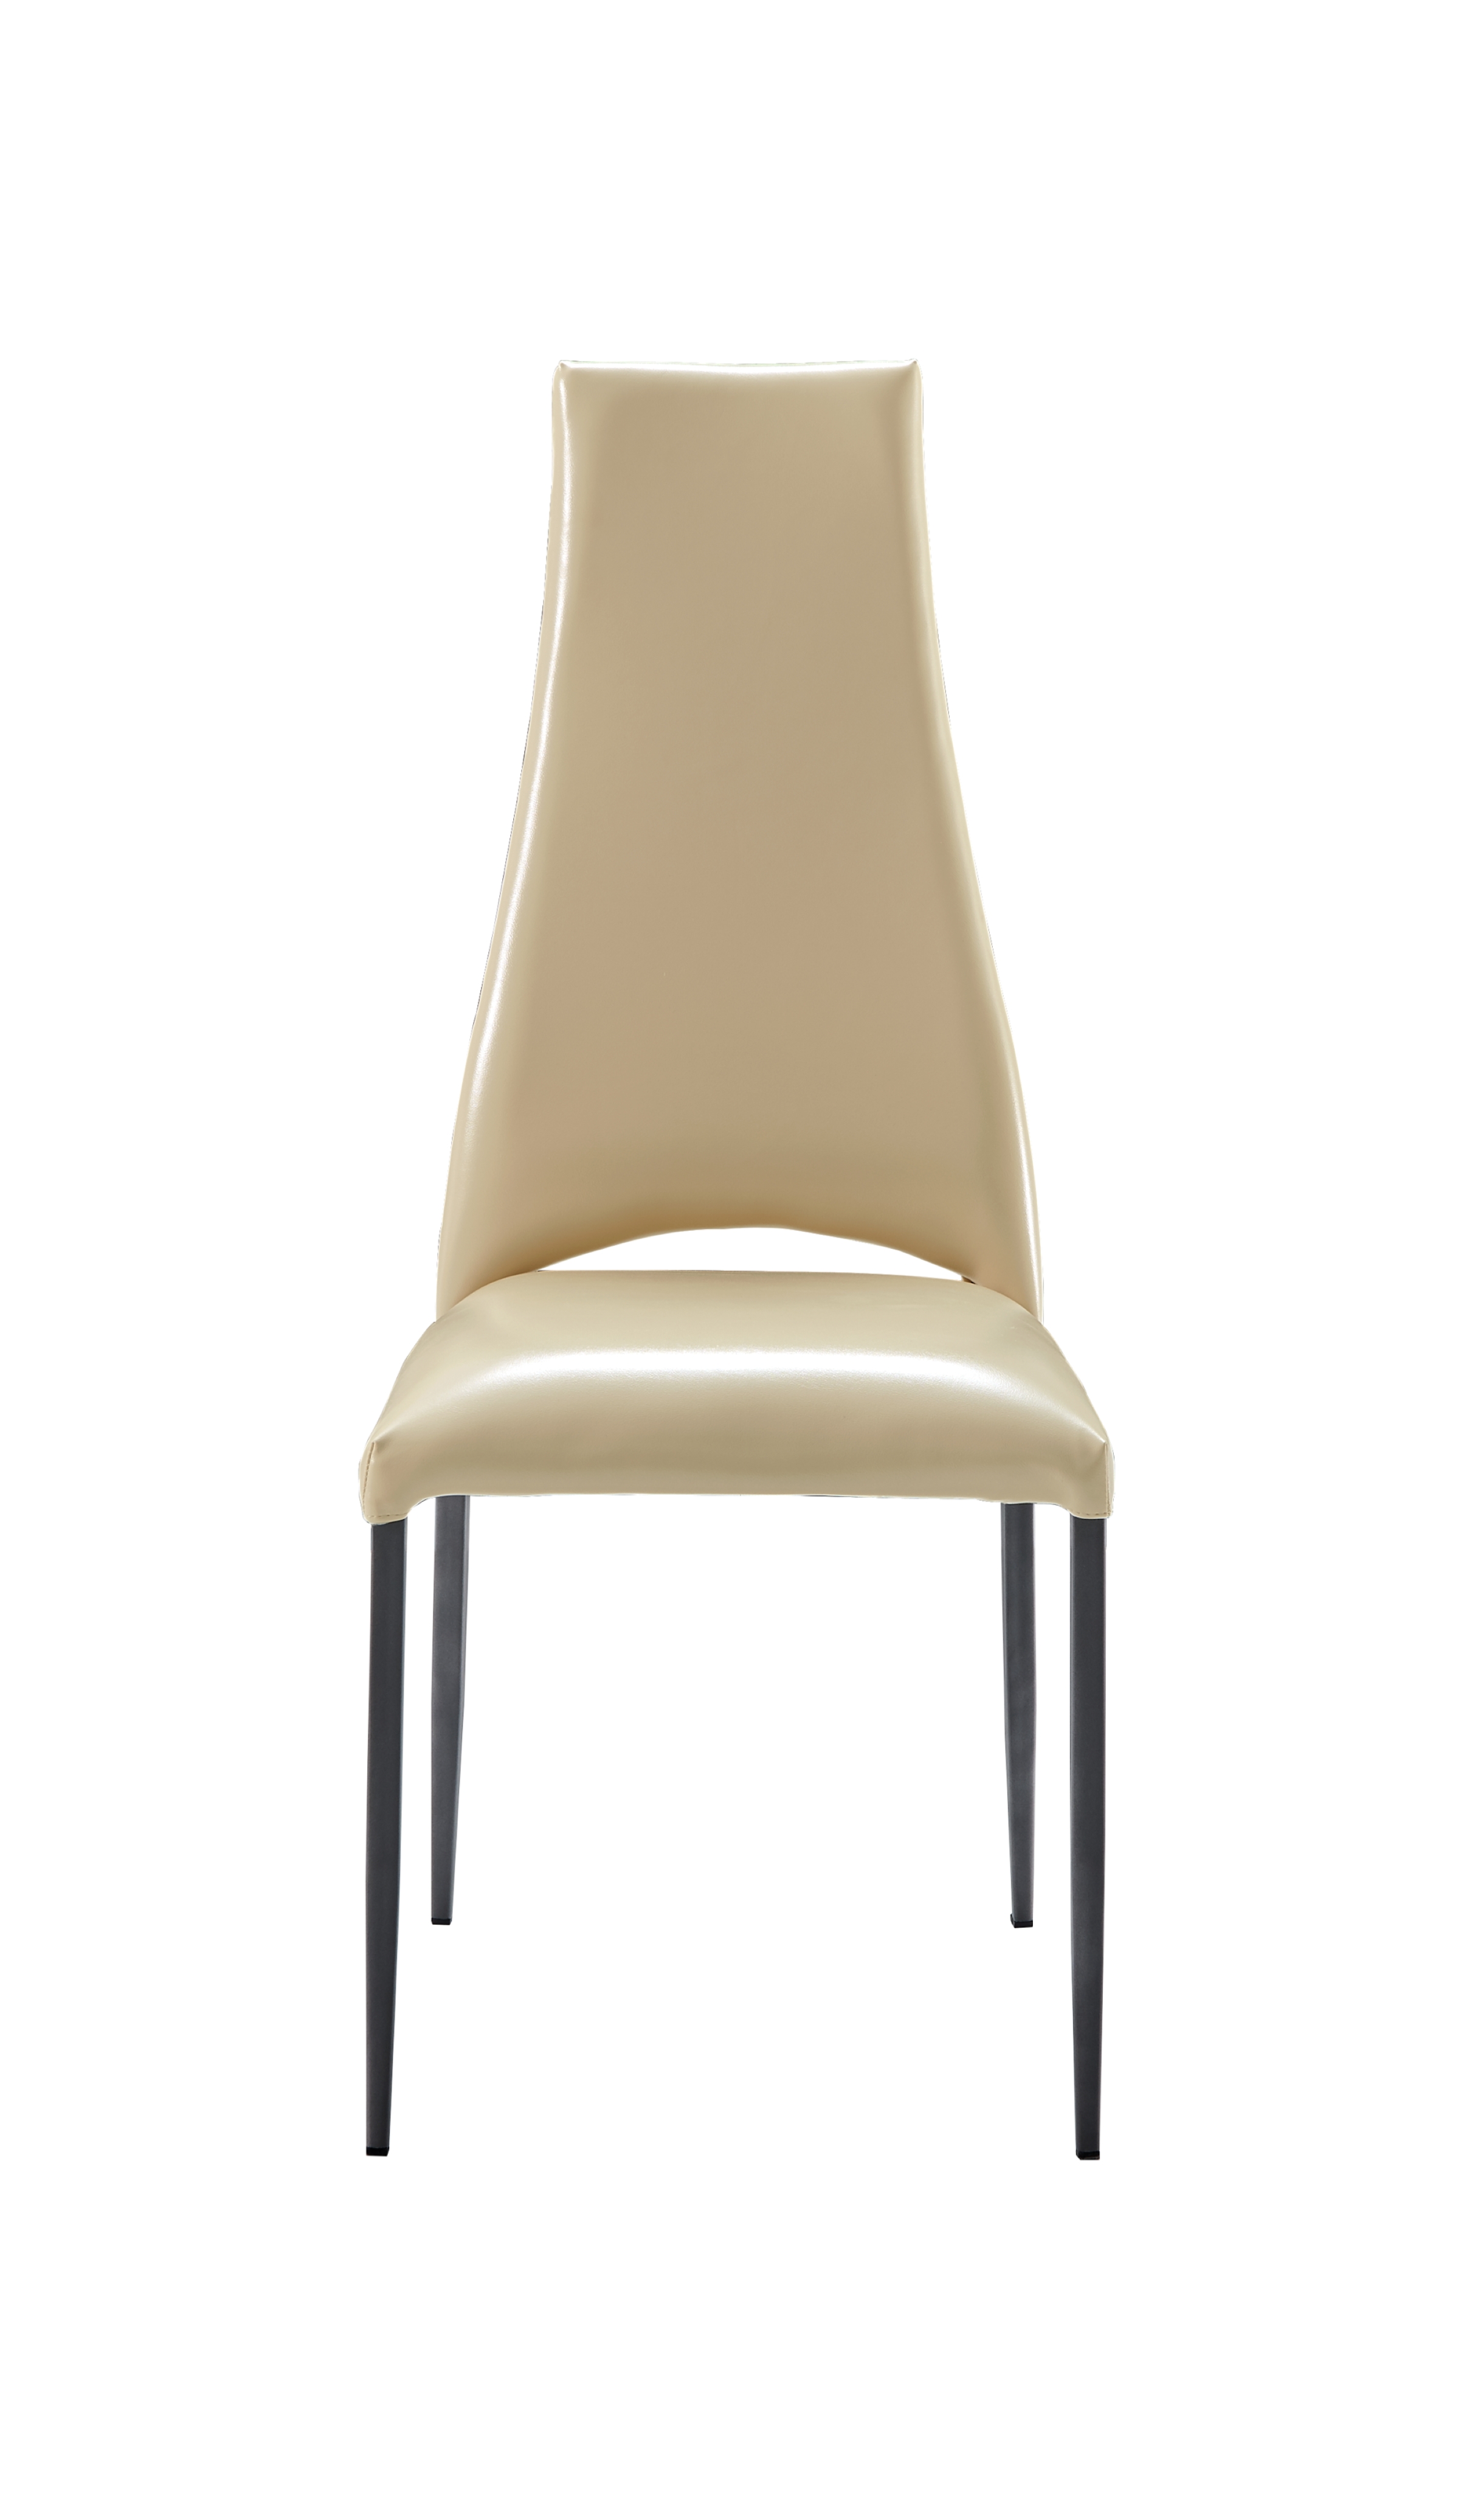 Clearance Dining Room 3405 Chair Beige